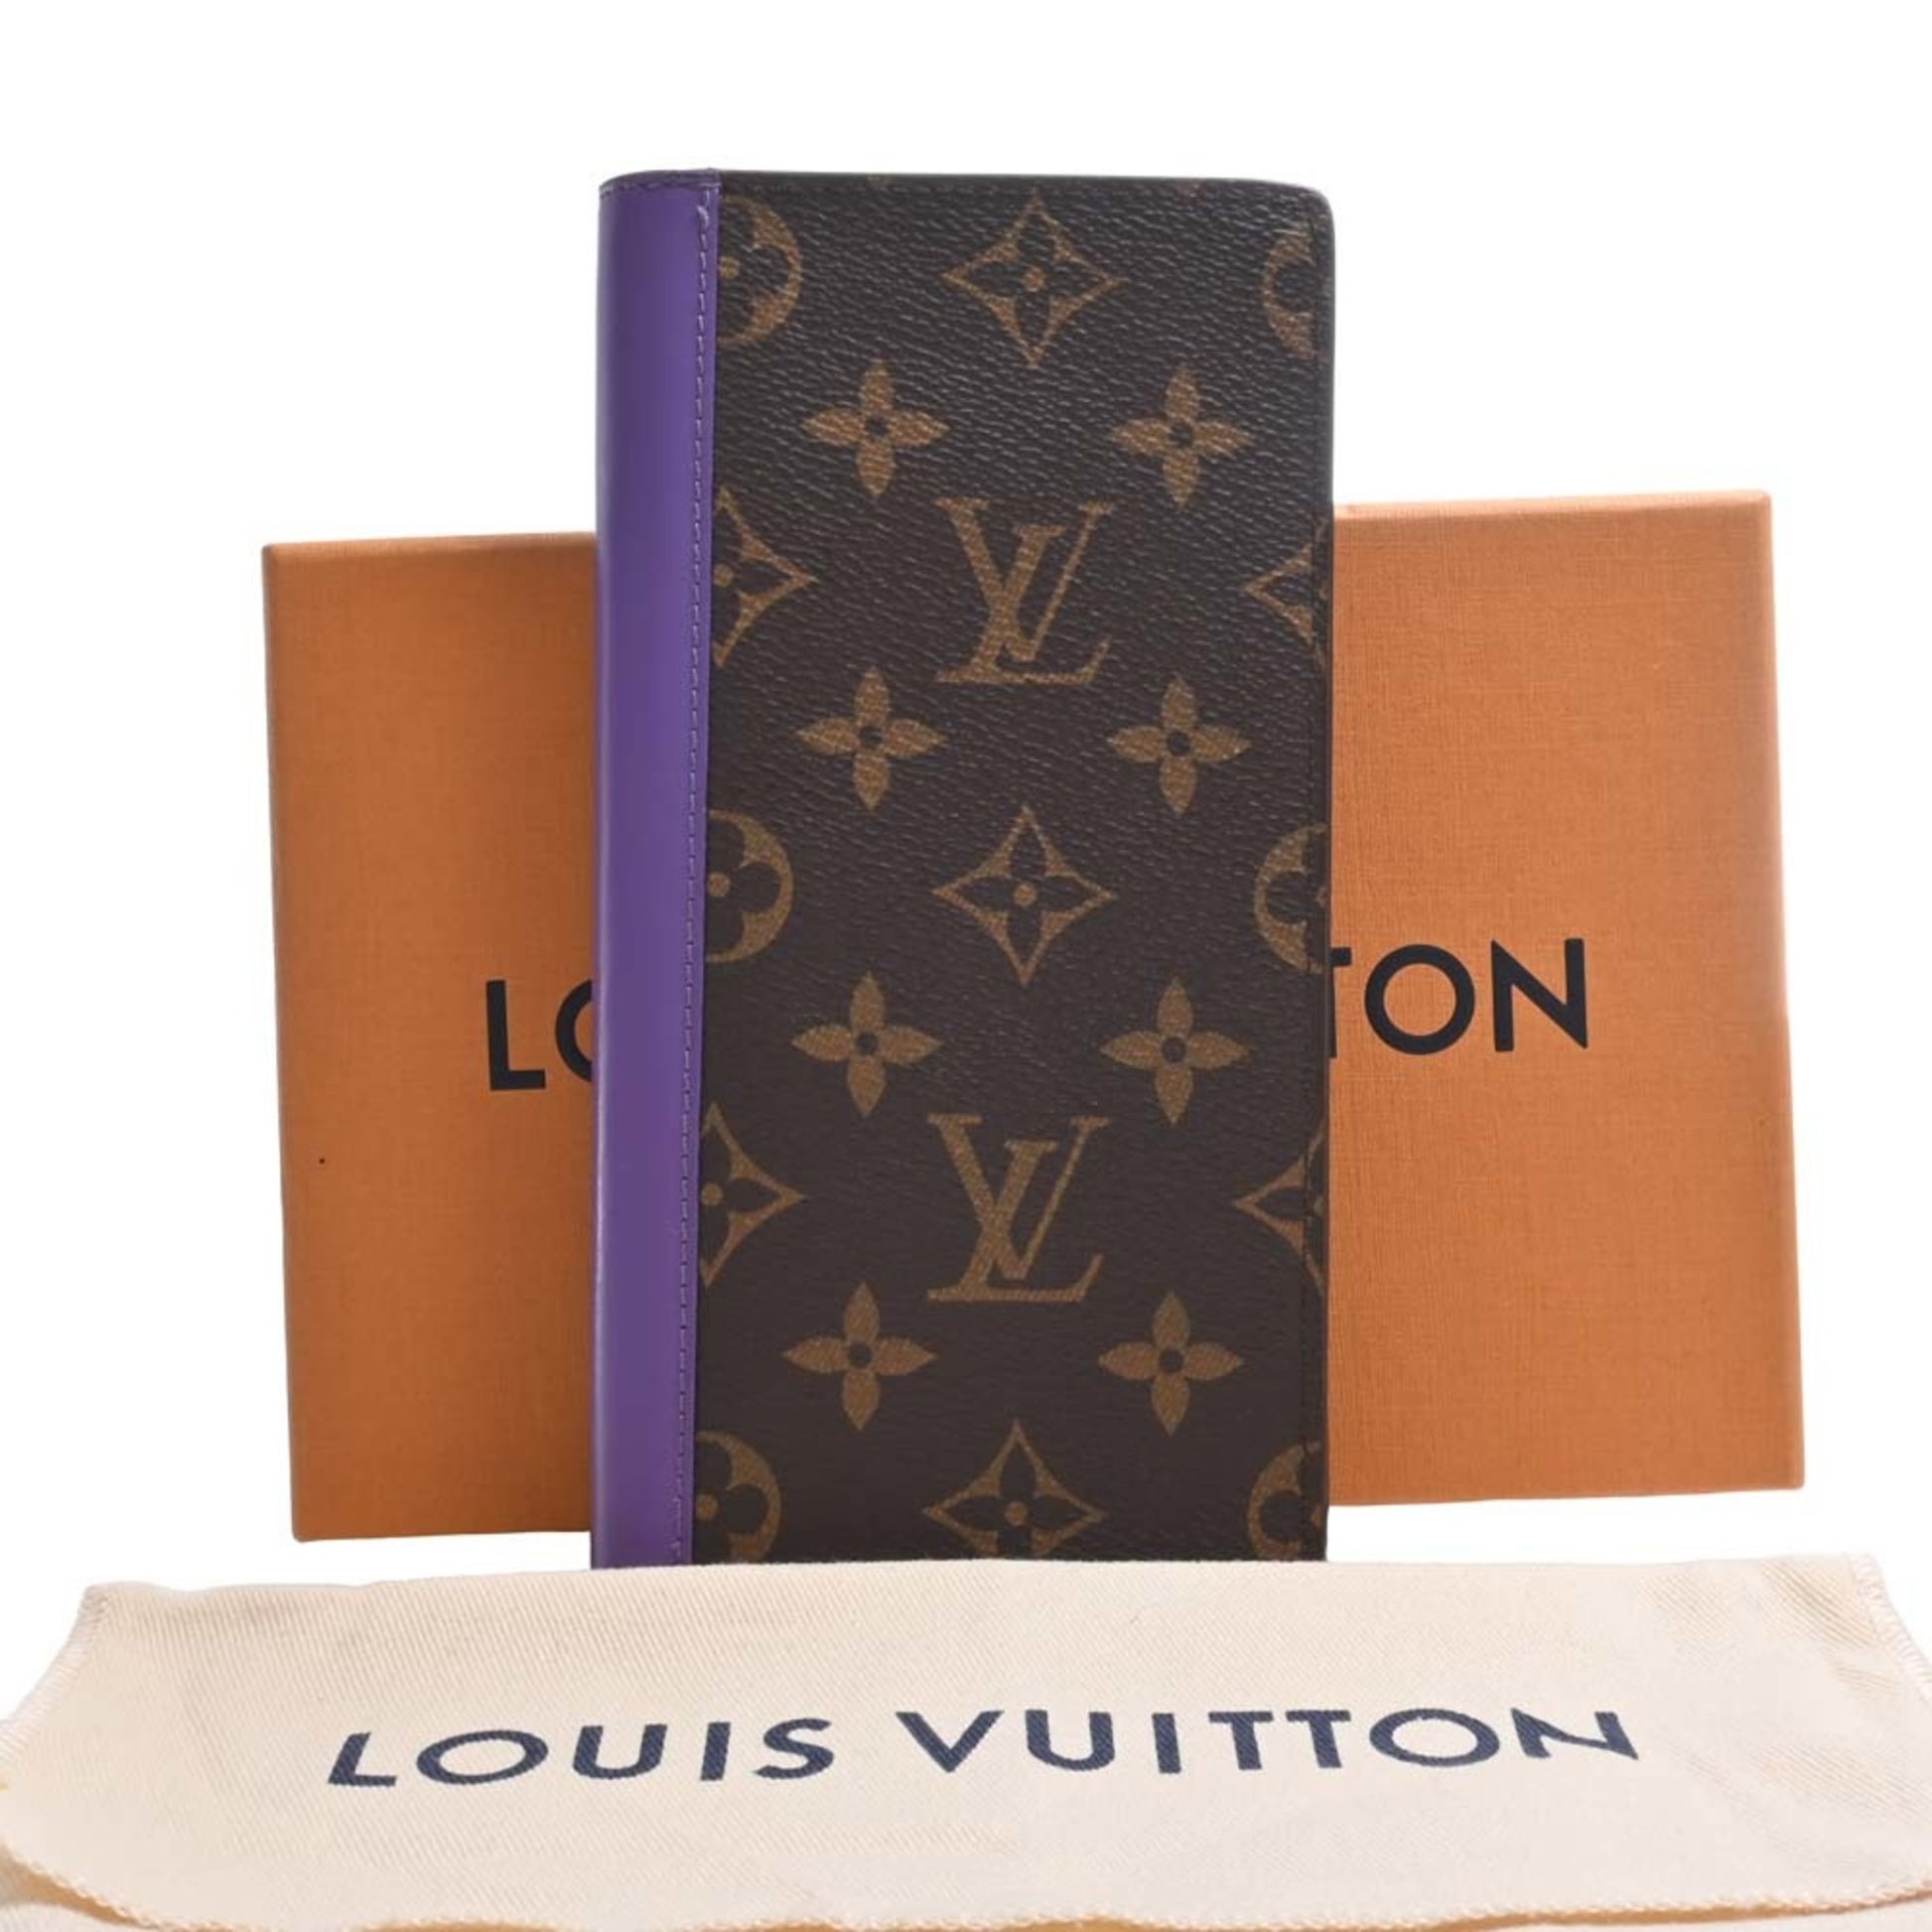 Louis Vuitton - Authenticated Zippy Wallet - Leather Brown for Women, Good Condition